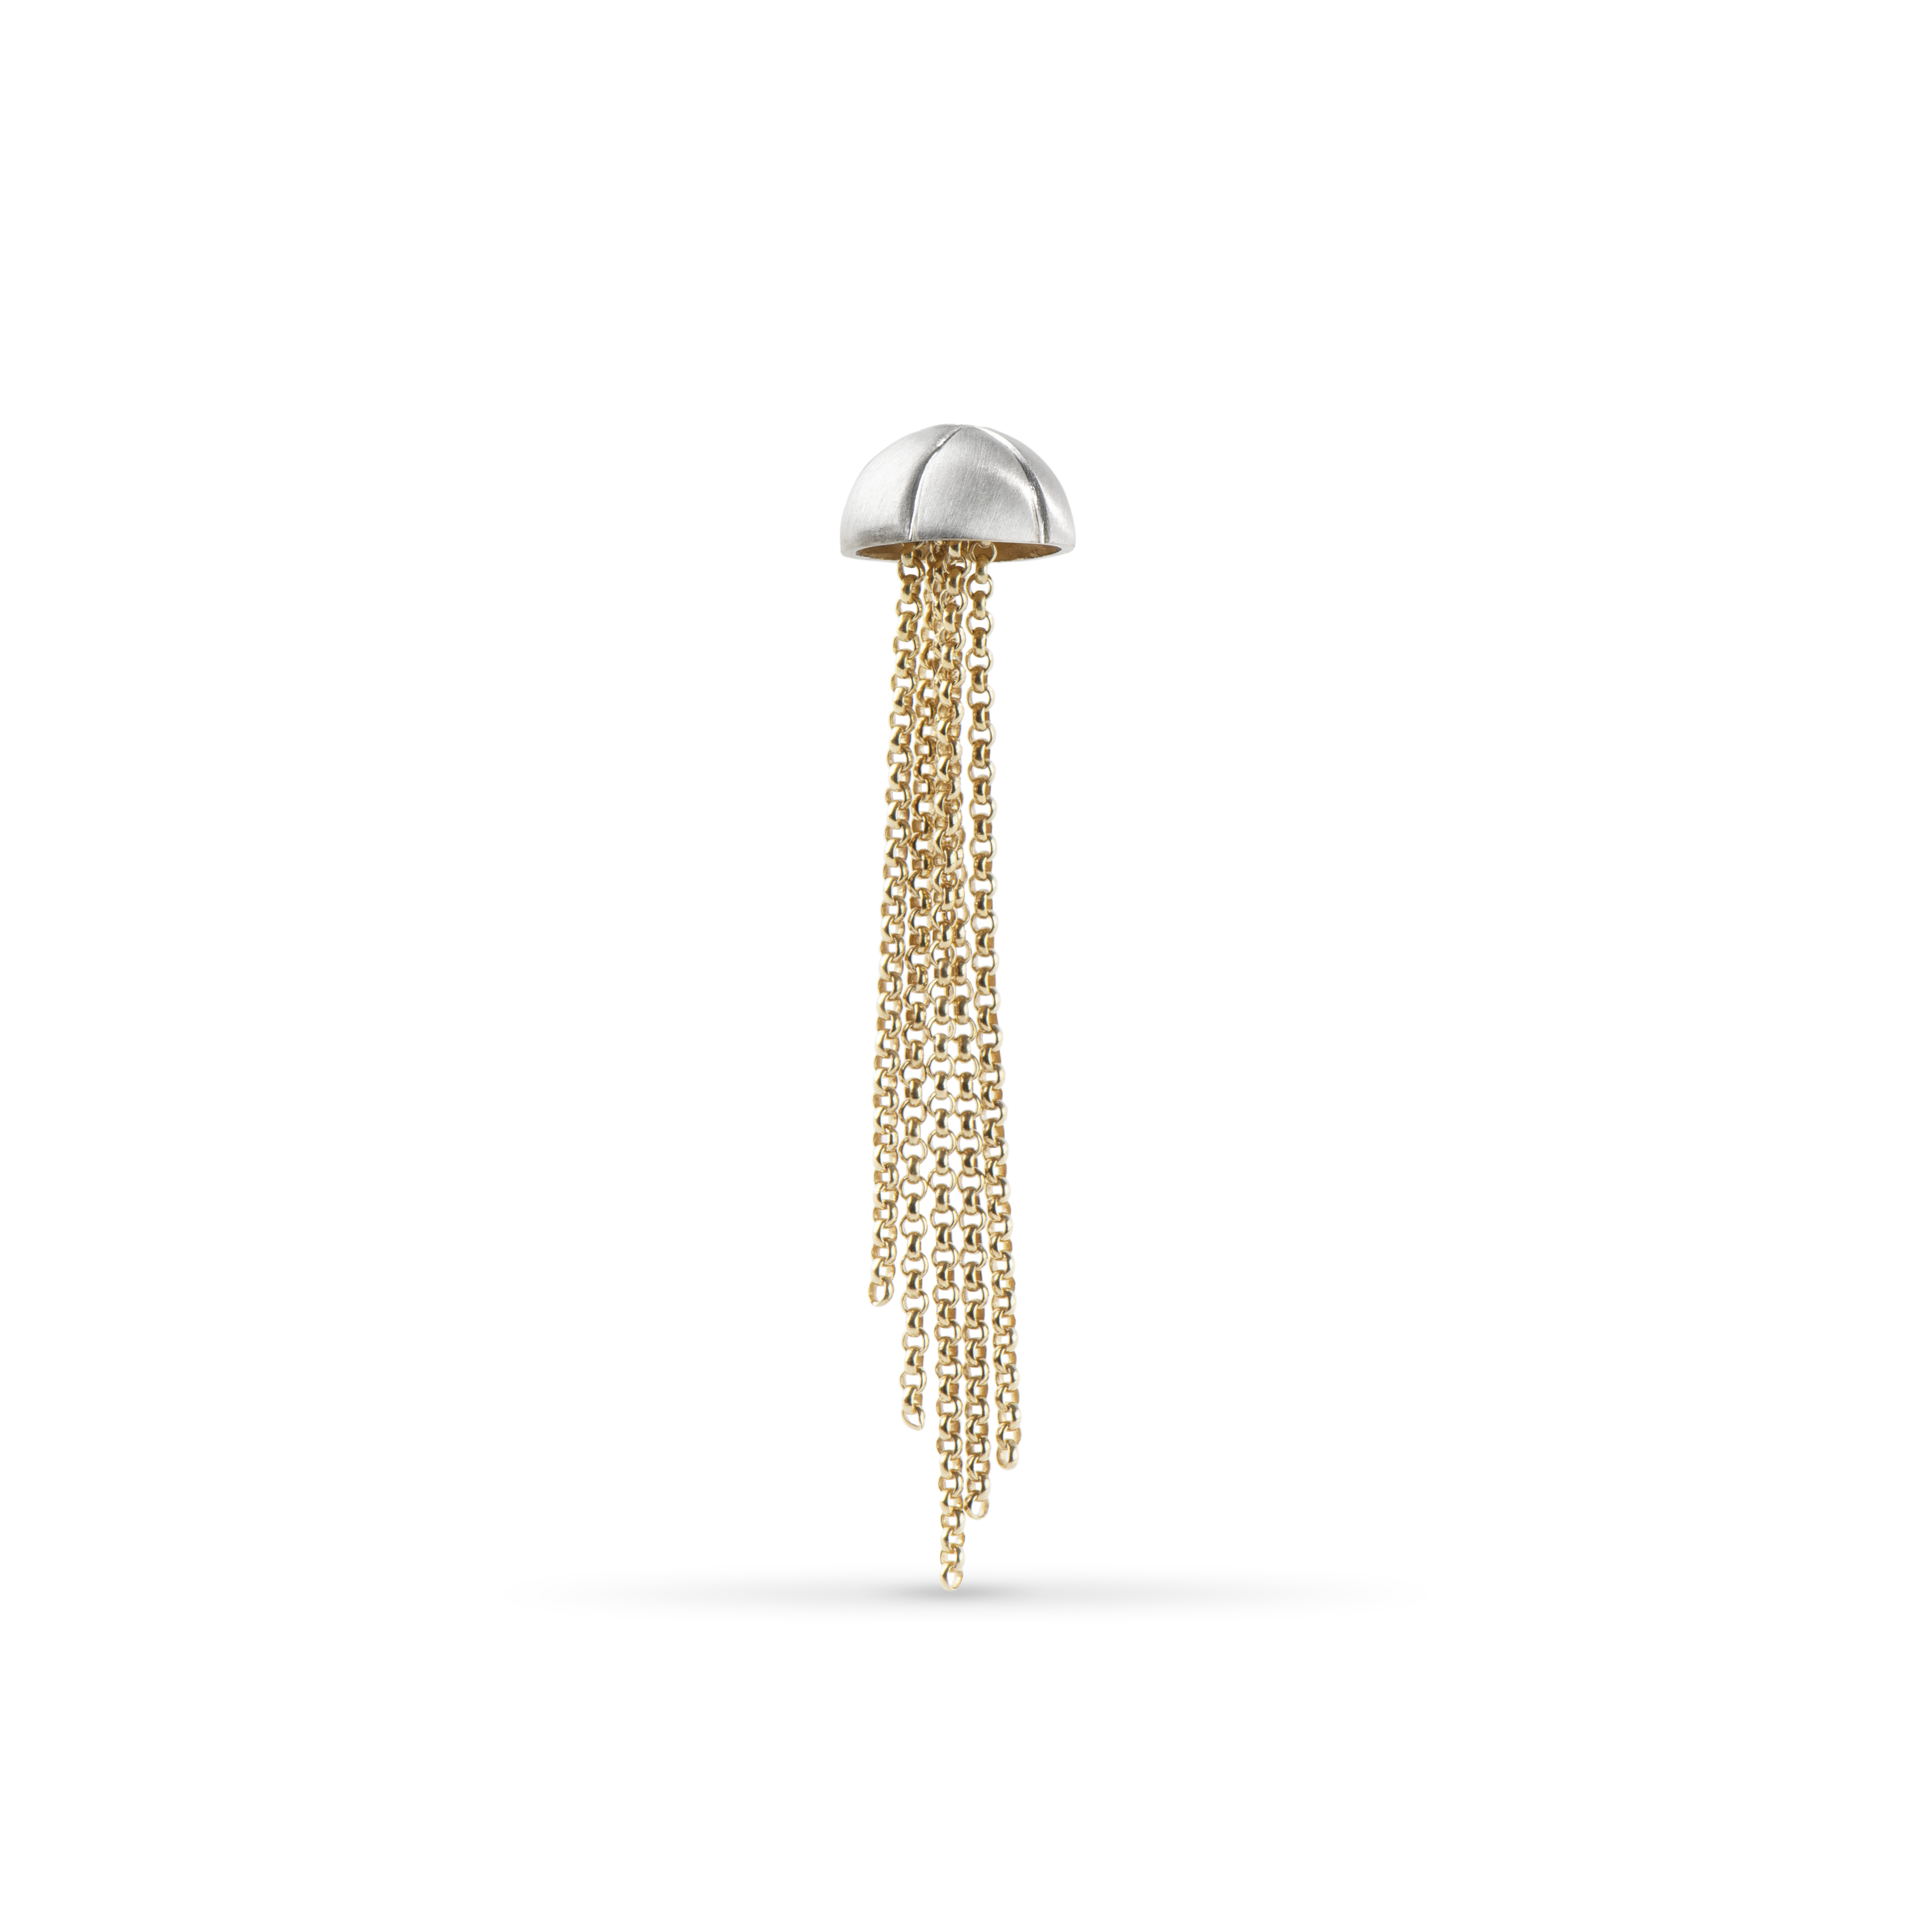 Jellyfish Earring - Silver and Gold - Image 2